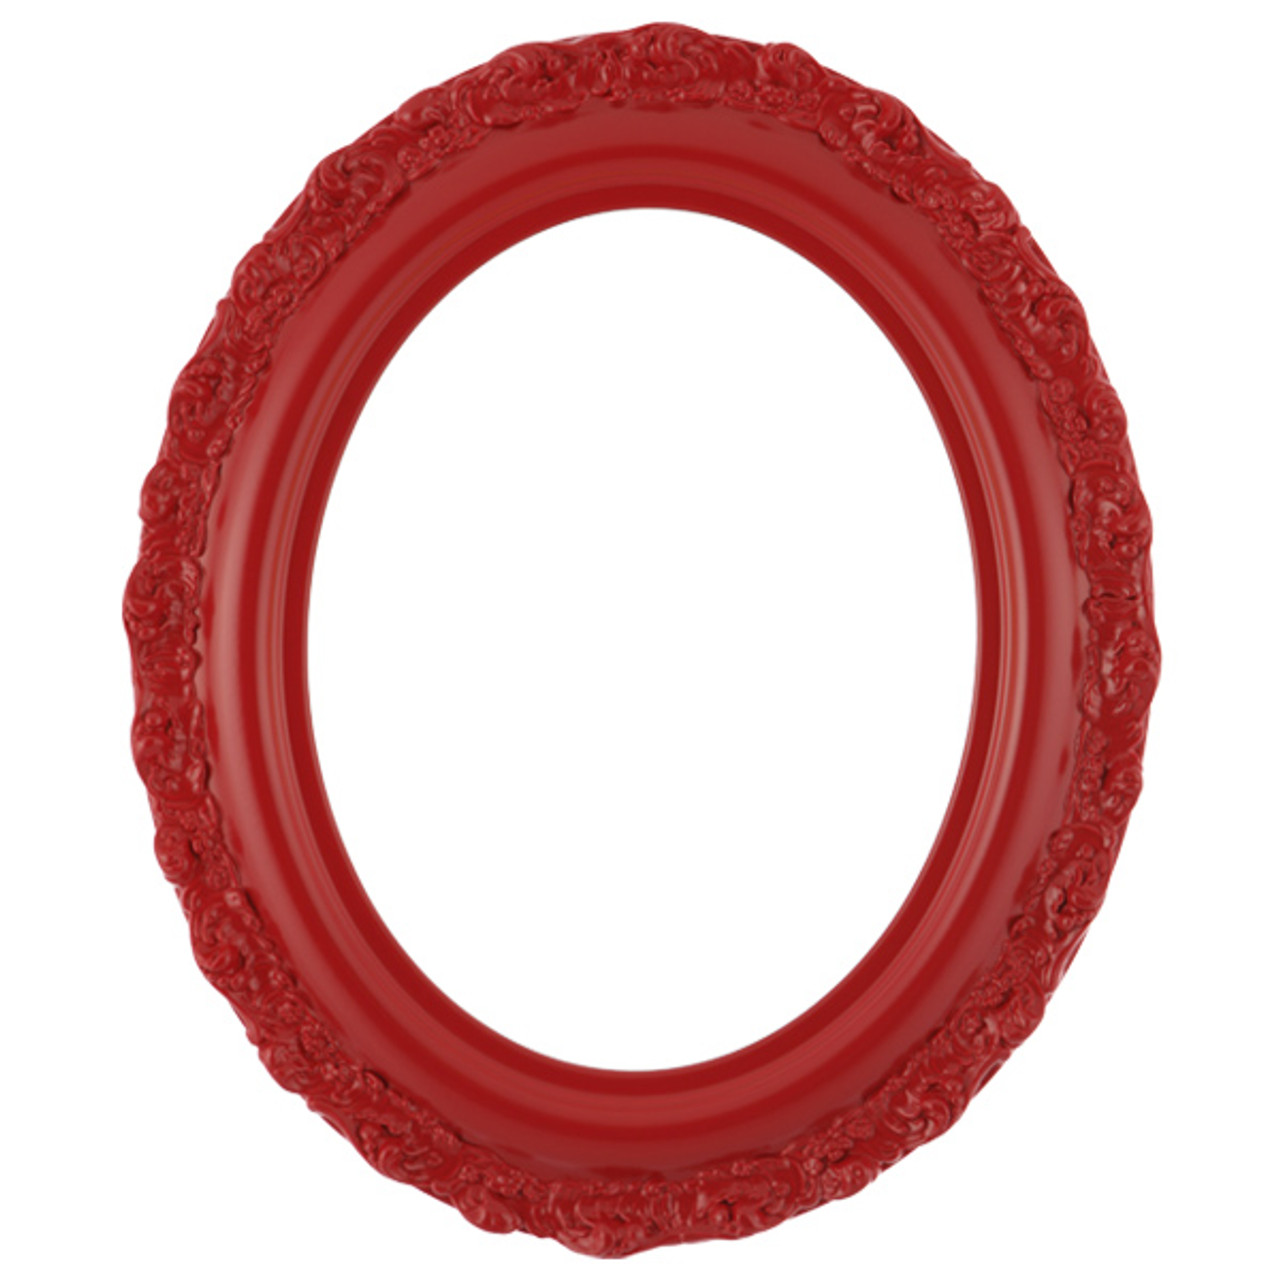 Venice Oval Picture Frame - Holiday Red